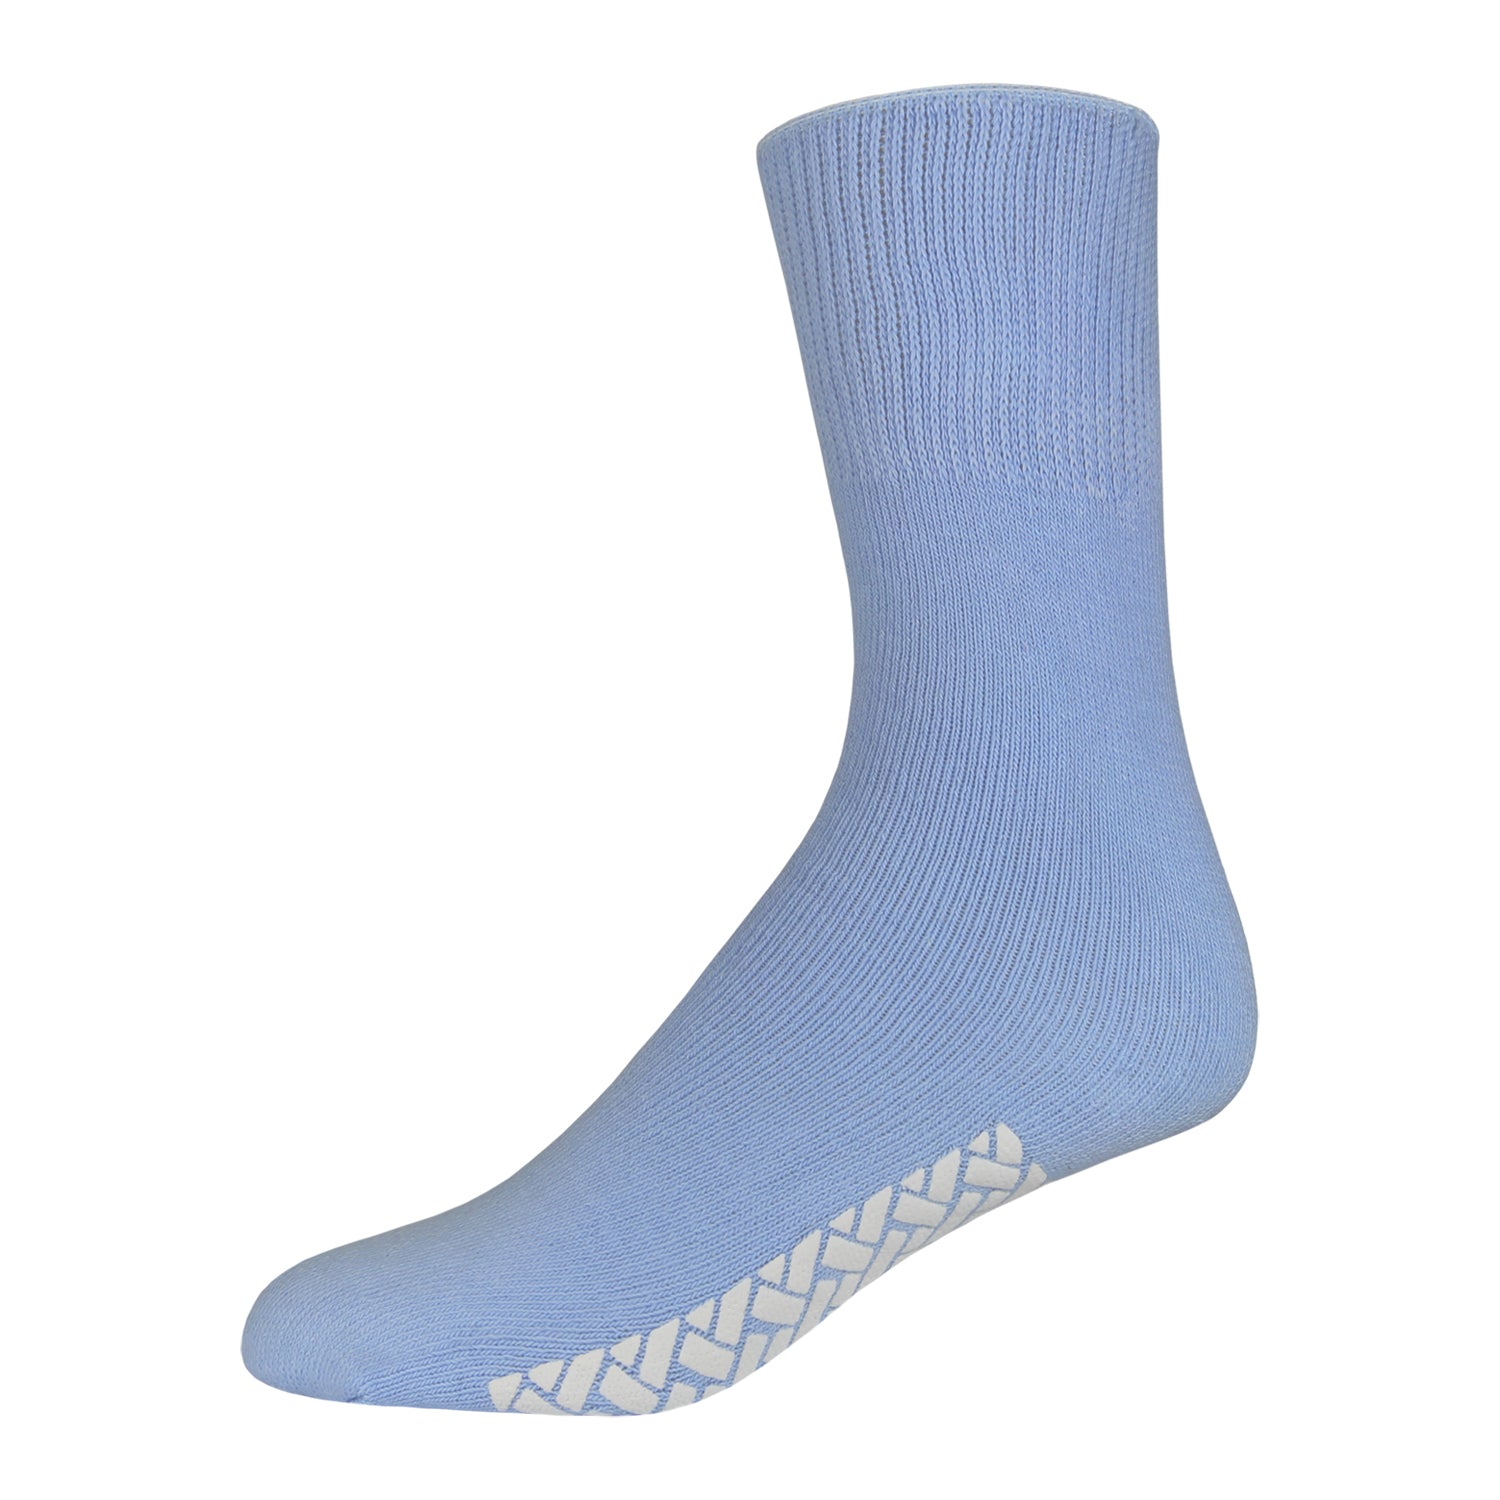 Blue Women's Hospital Socks With The Rubber On The Bottom Of Them And Loose Top